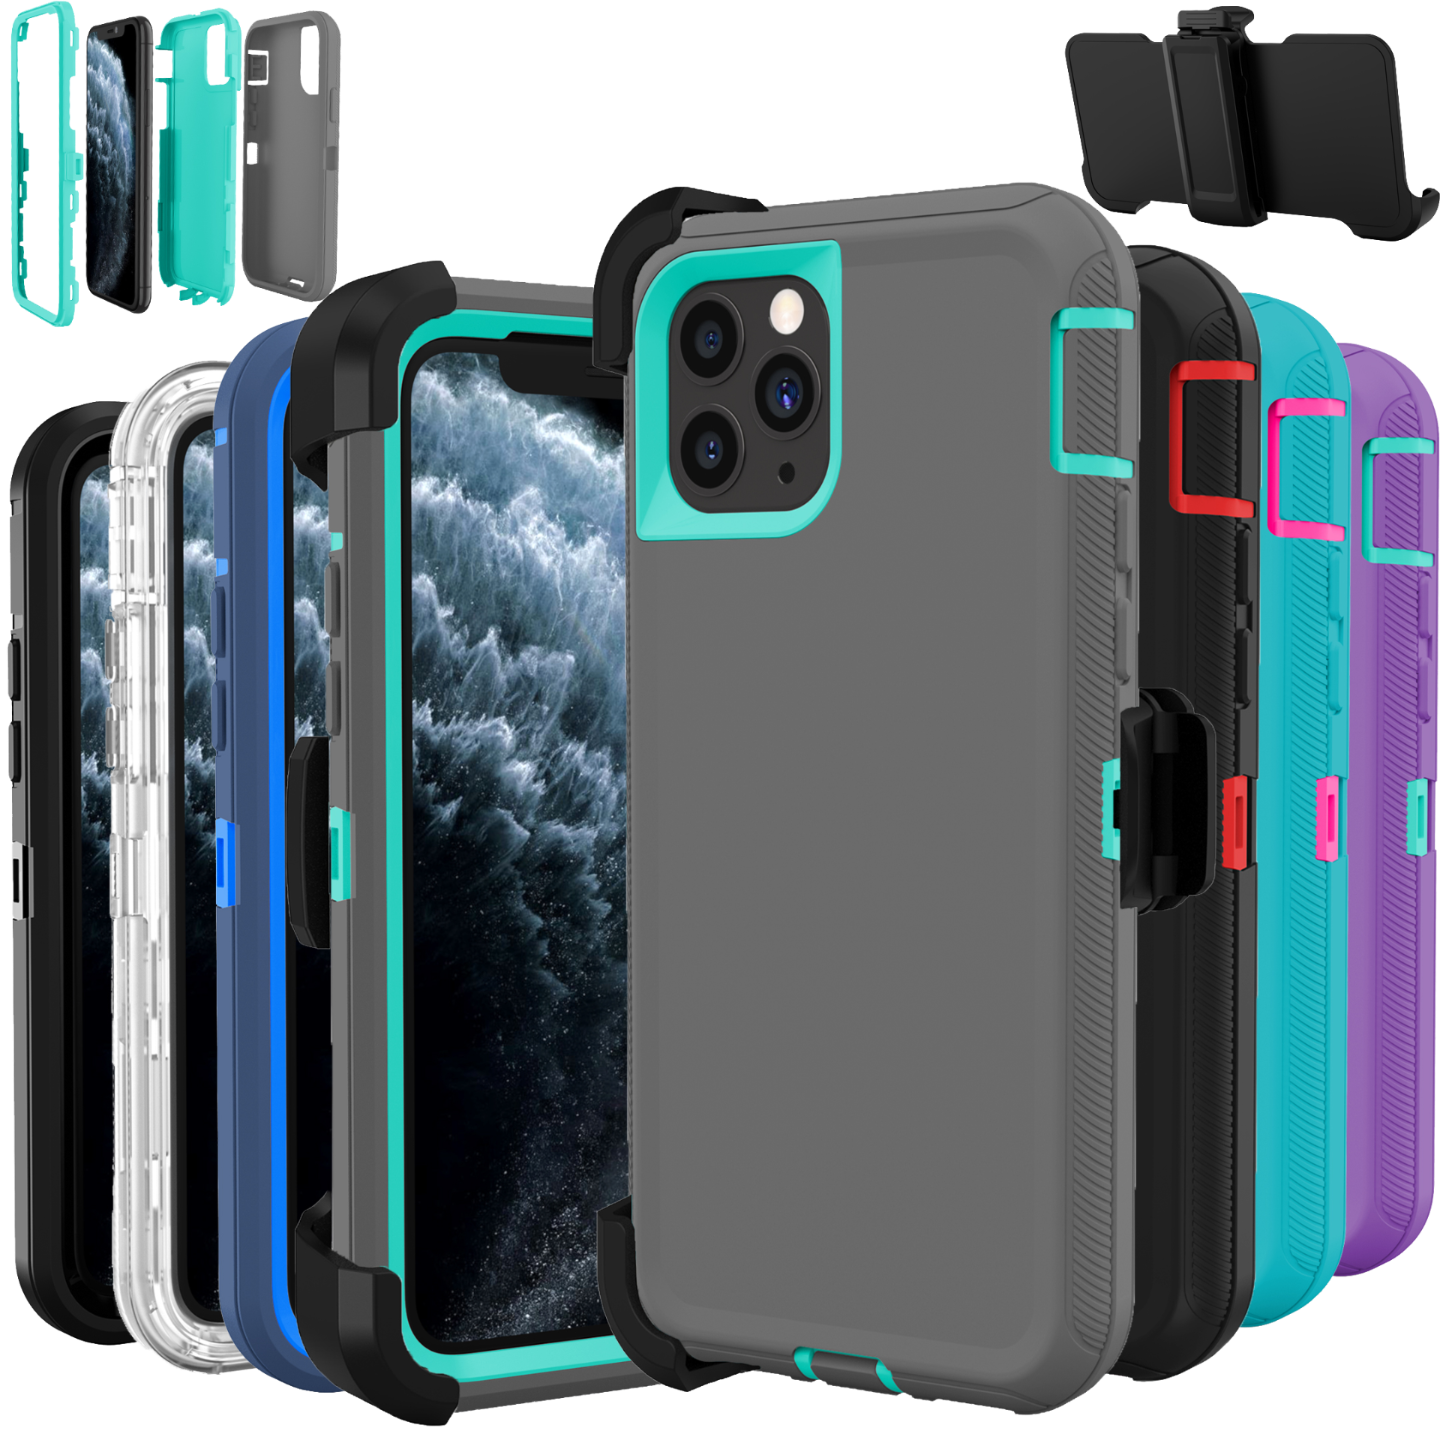 Shockproof Fits Otterbox Case Cover For Apple Iphone 11 Pro Max With Belt Clip Ebay